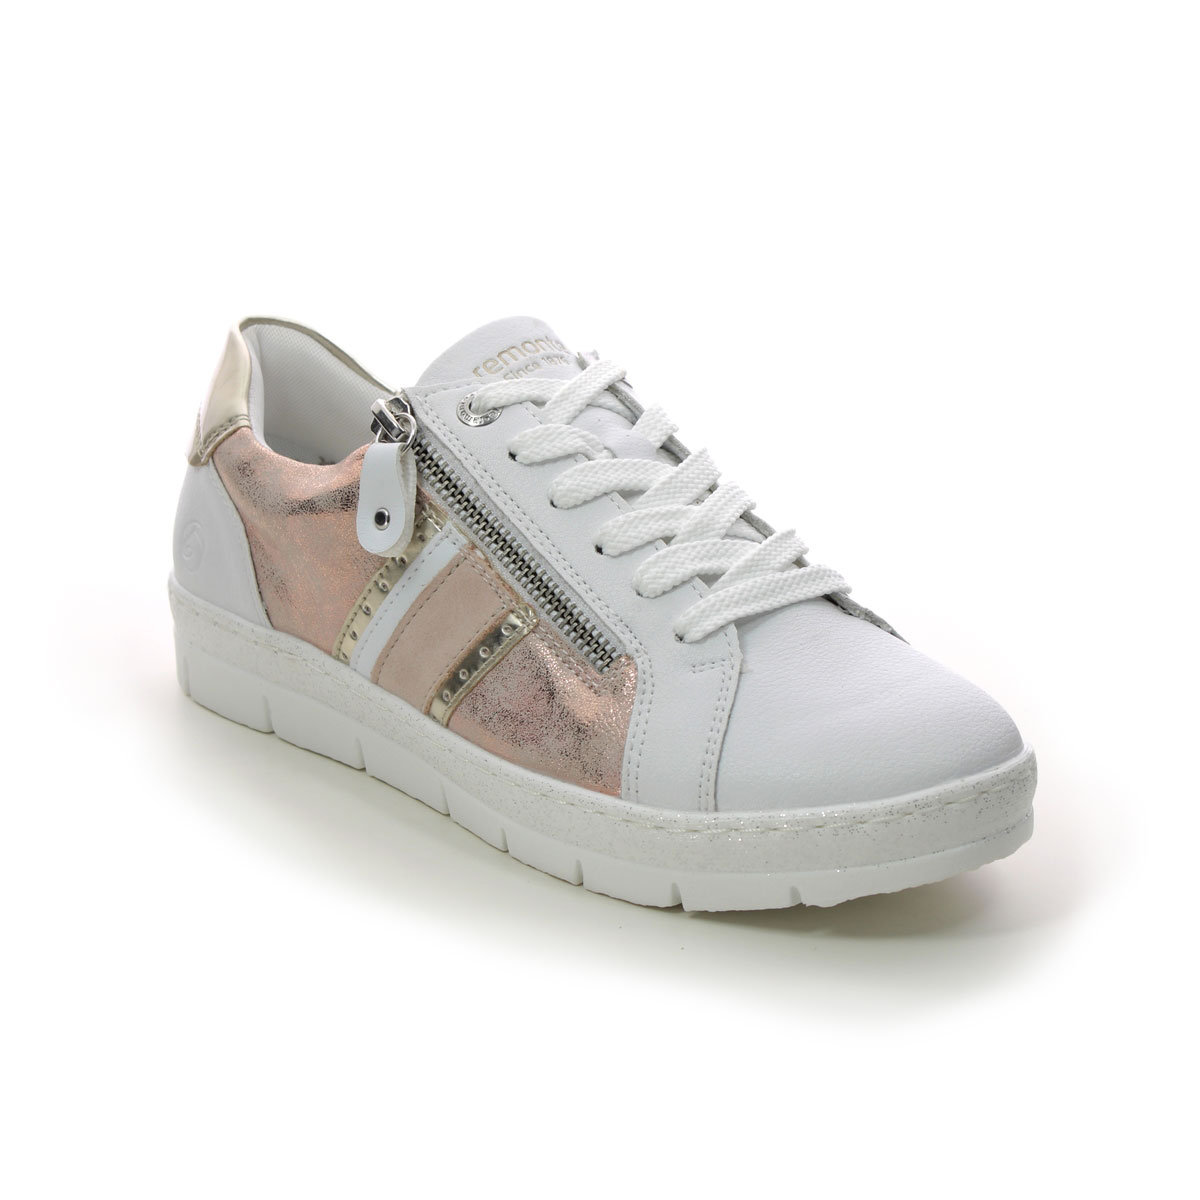 Remonte Ravenna 11 White Rose Gold Womens Trainers D5827-90 In Size 39 In Plain White Rose Gold